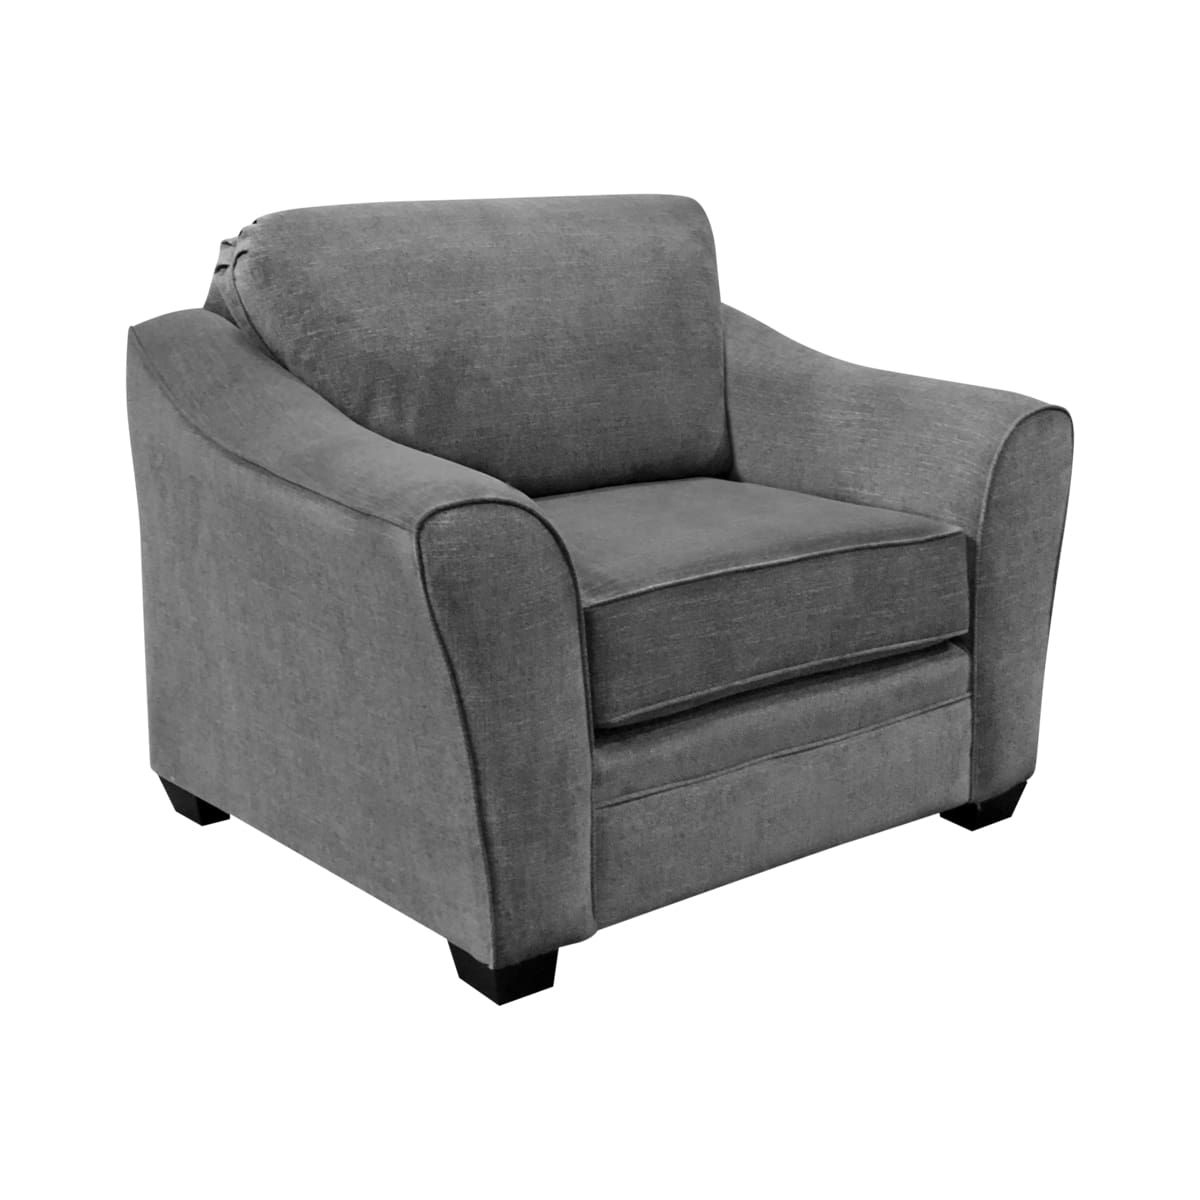 Tyson Chair - accent chairs